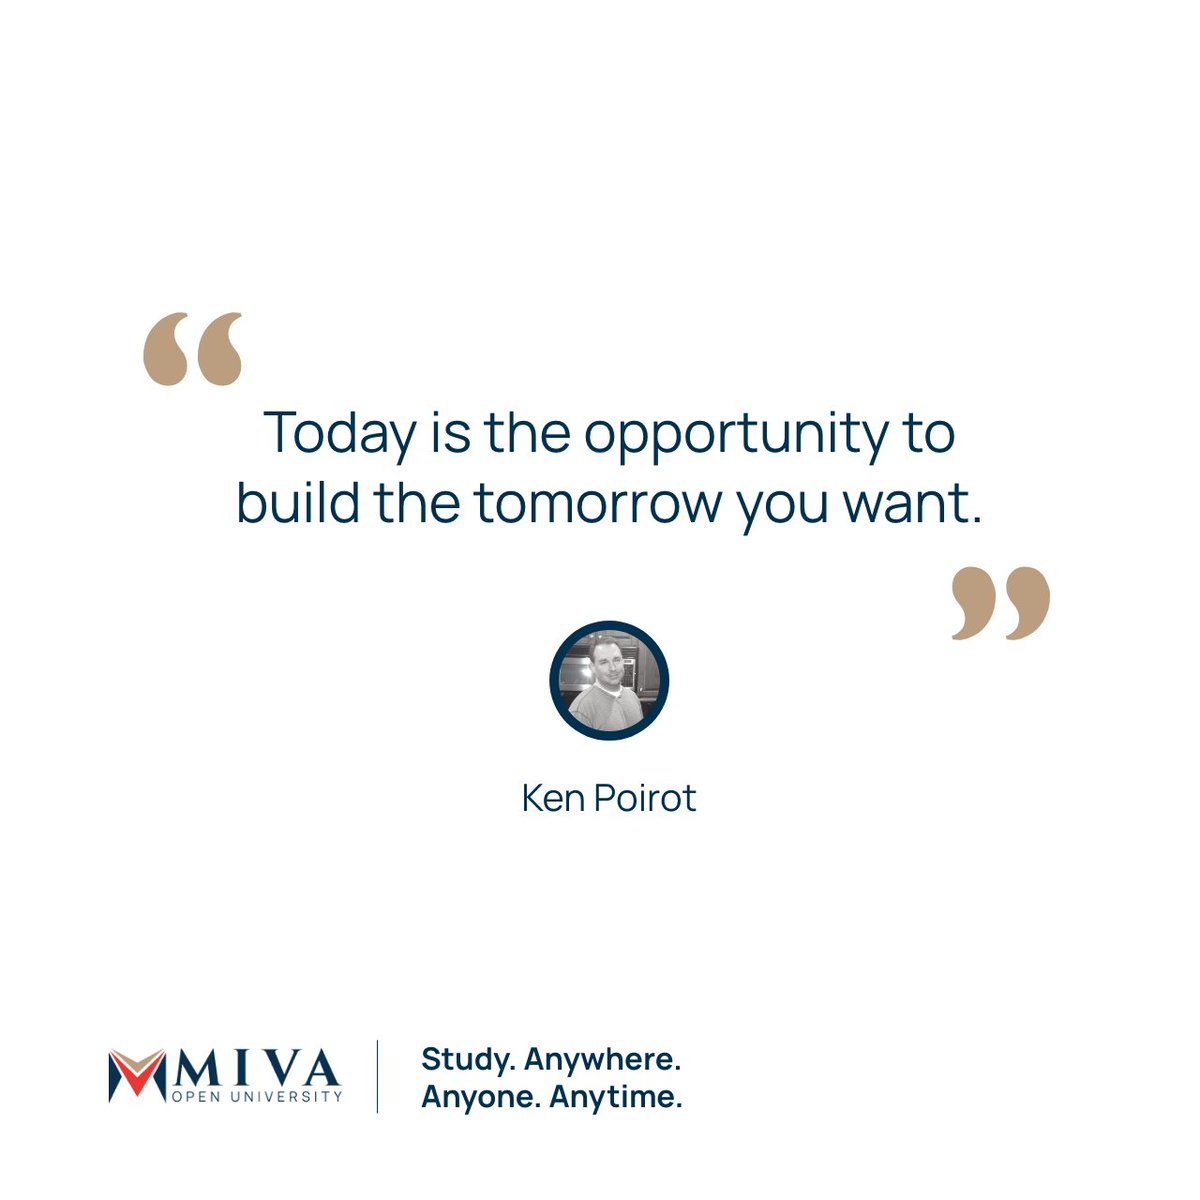 Seize the day and create the life you desire. Think of an action you can take today that will move you closer to your goals.

You've got this! #ReachHigher! 🚀

#MivaOpenUniversity #GetMivaGetMoving #StudyAtMiva #OnlineUniversity